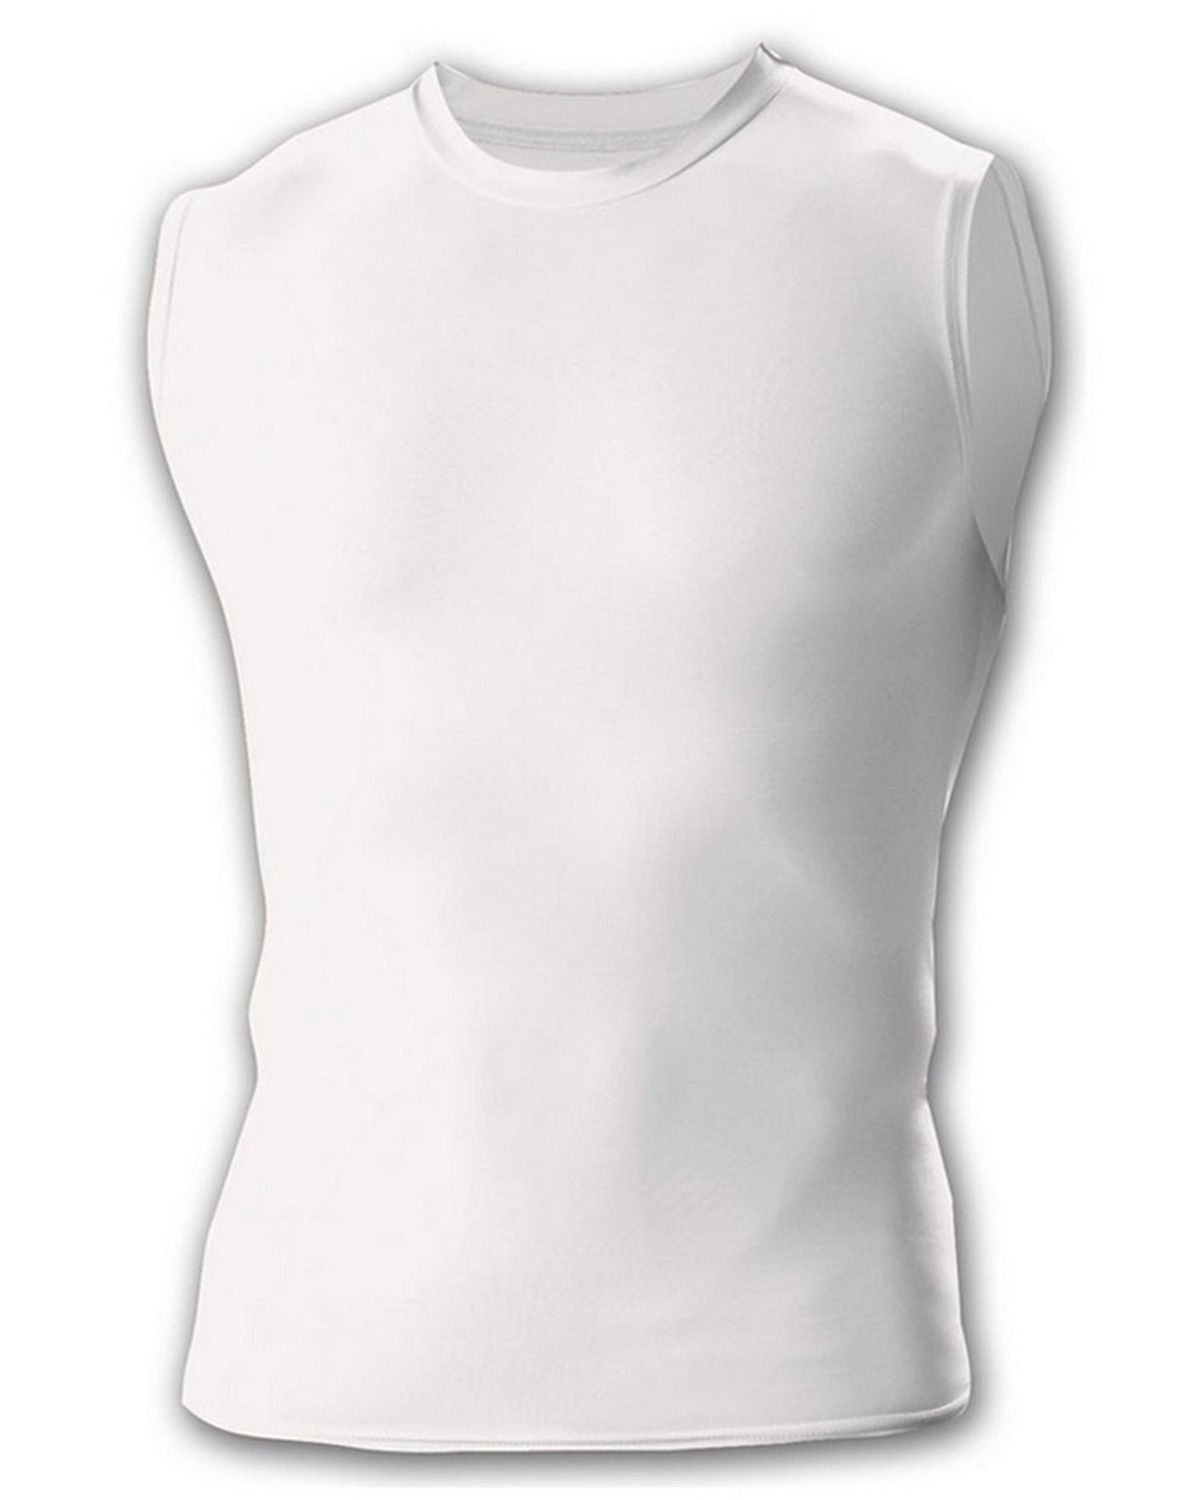 Buy A4 N2306 Compression Muscle Tee